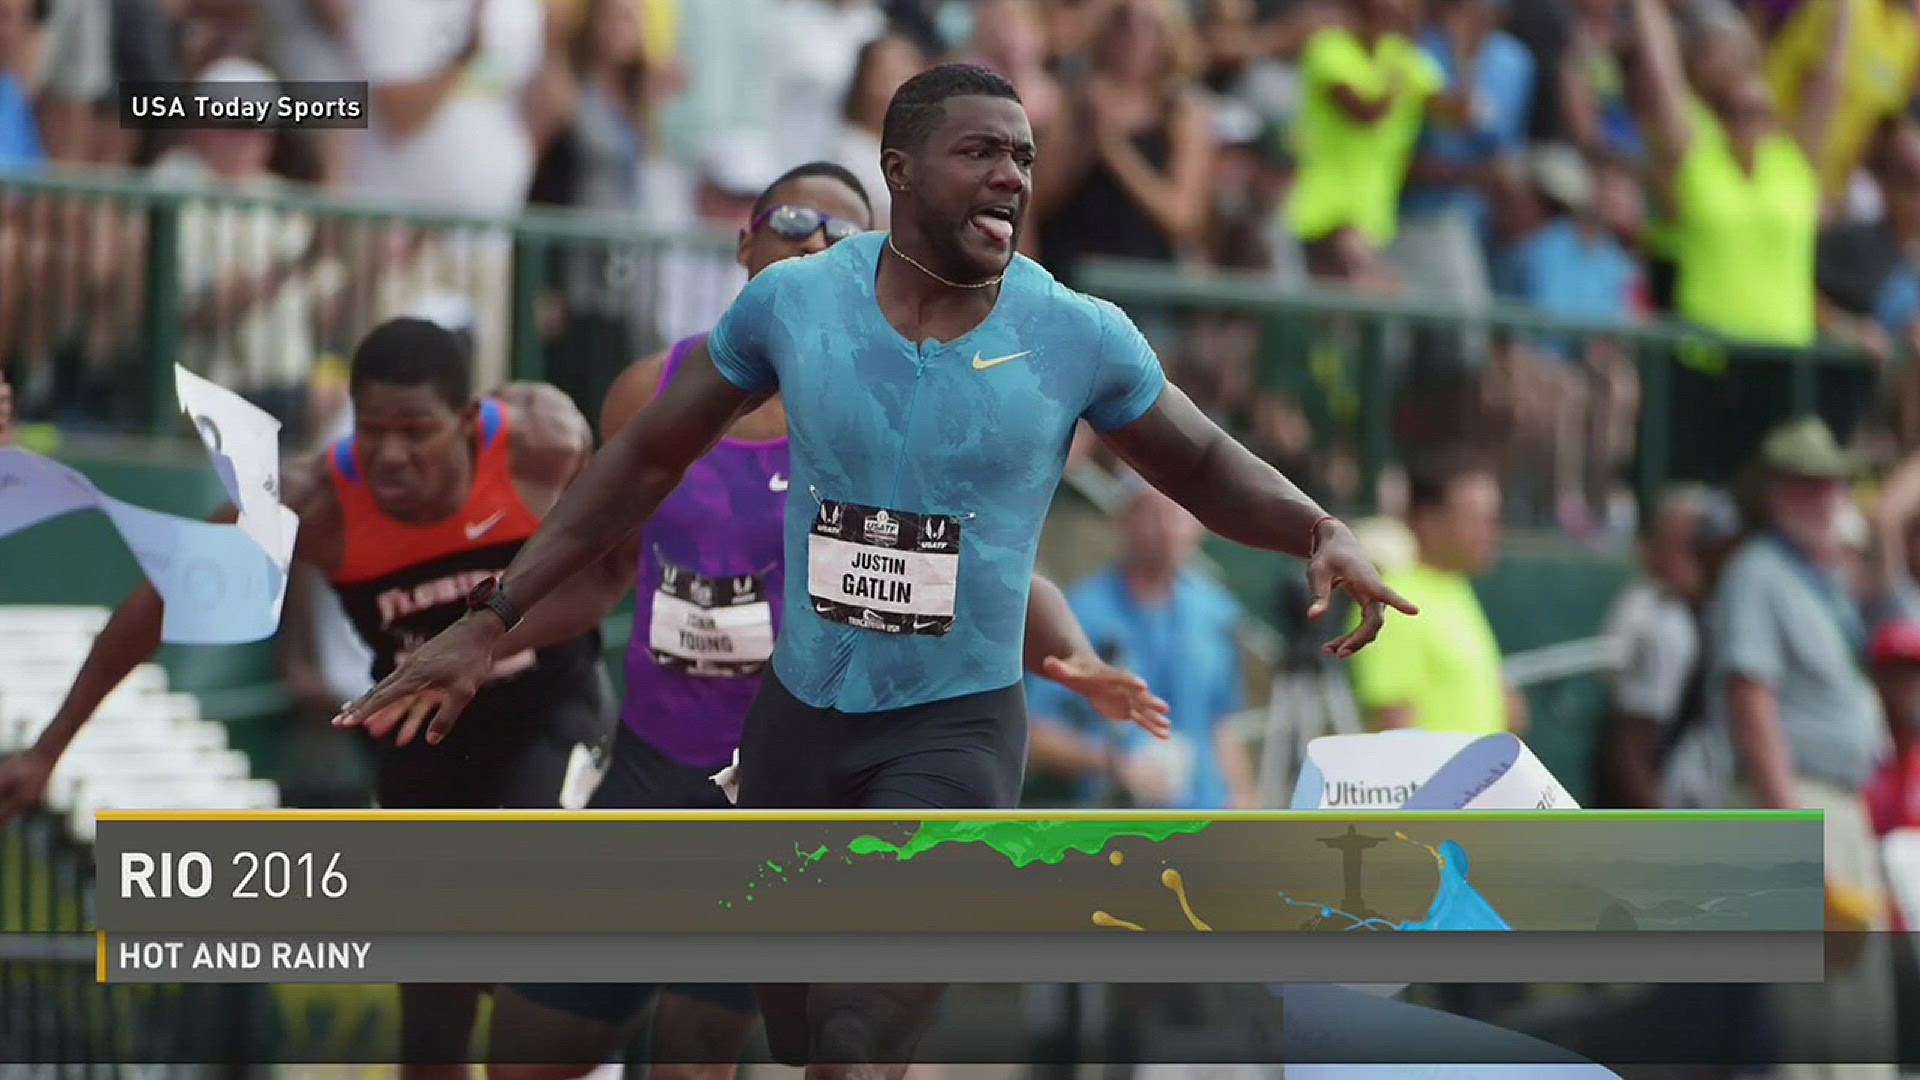 Justin Gatlin will compete in the 100-meter dash, 200-meter dash and 4x100-meter relay.